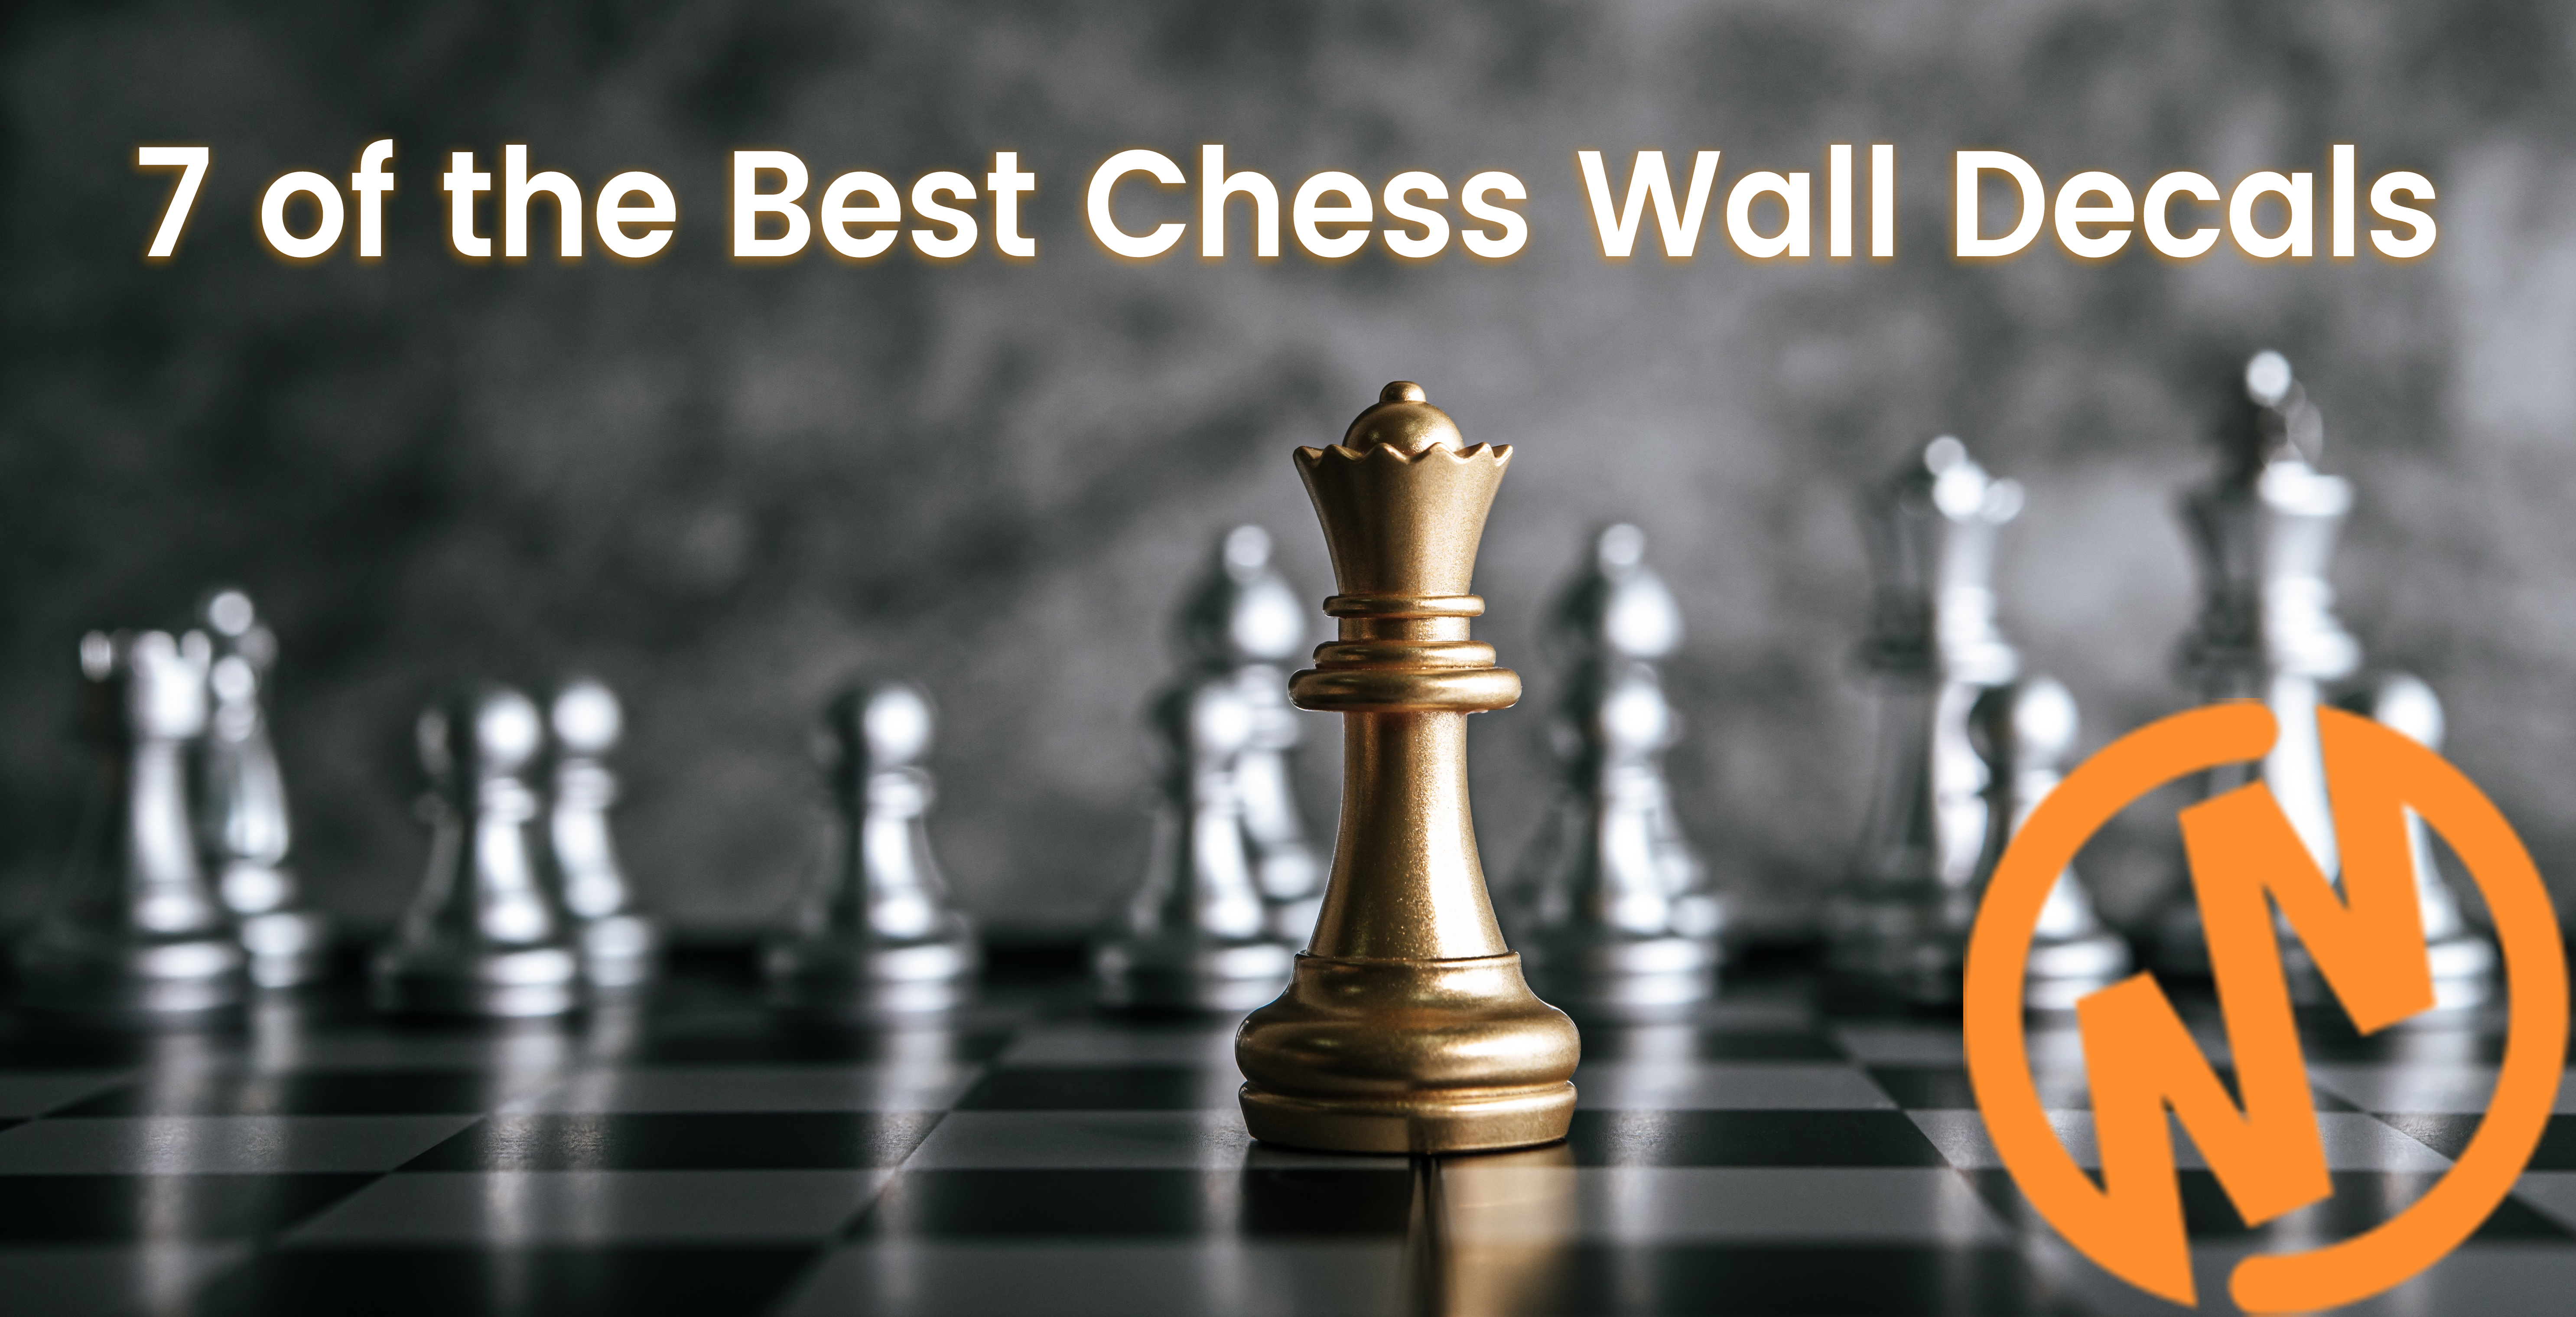 7 of the Best Chess Wall Decals and Murals